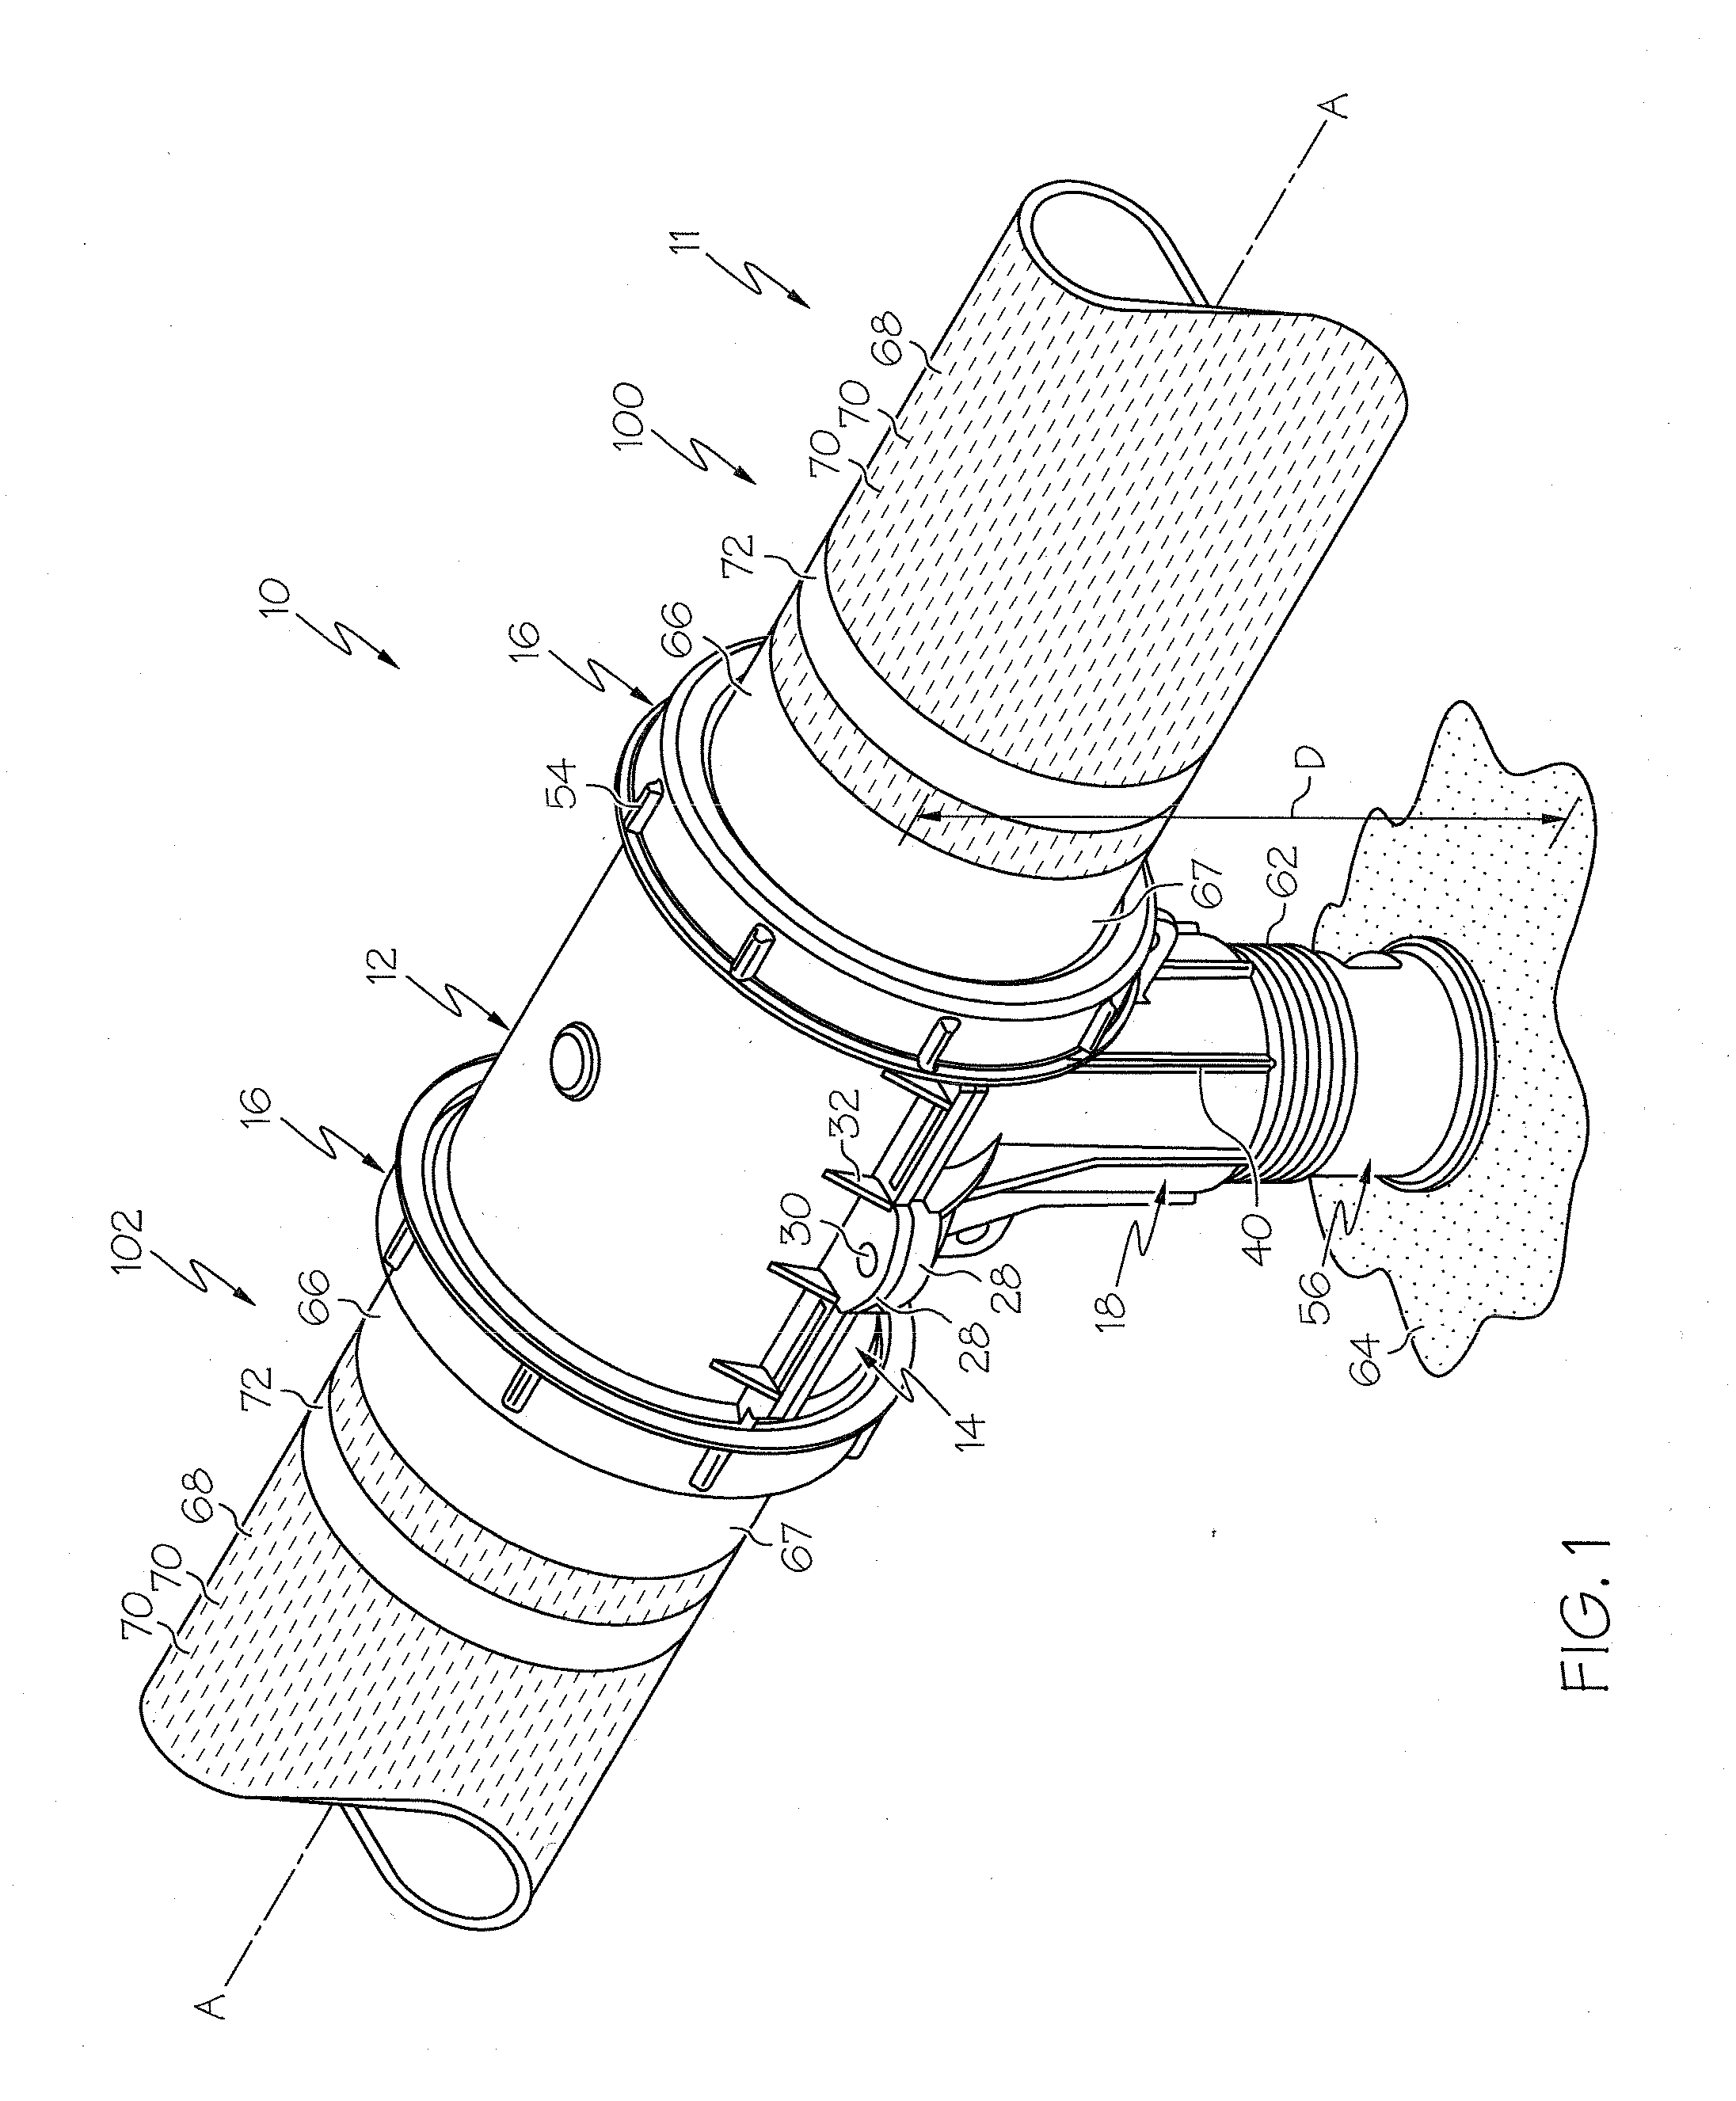 Modular diffuser body and aeration system